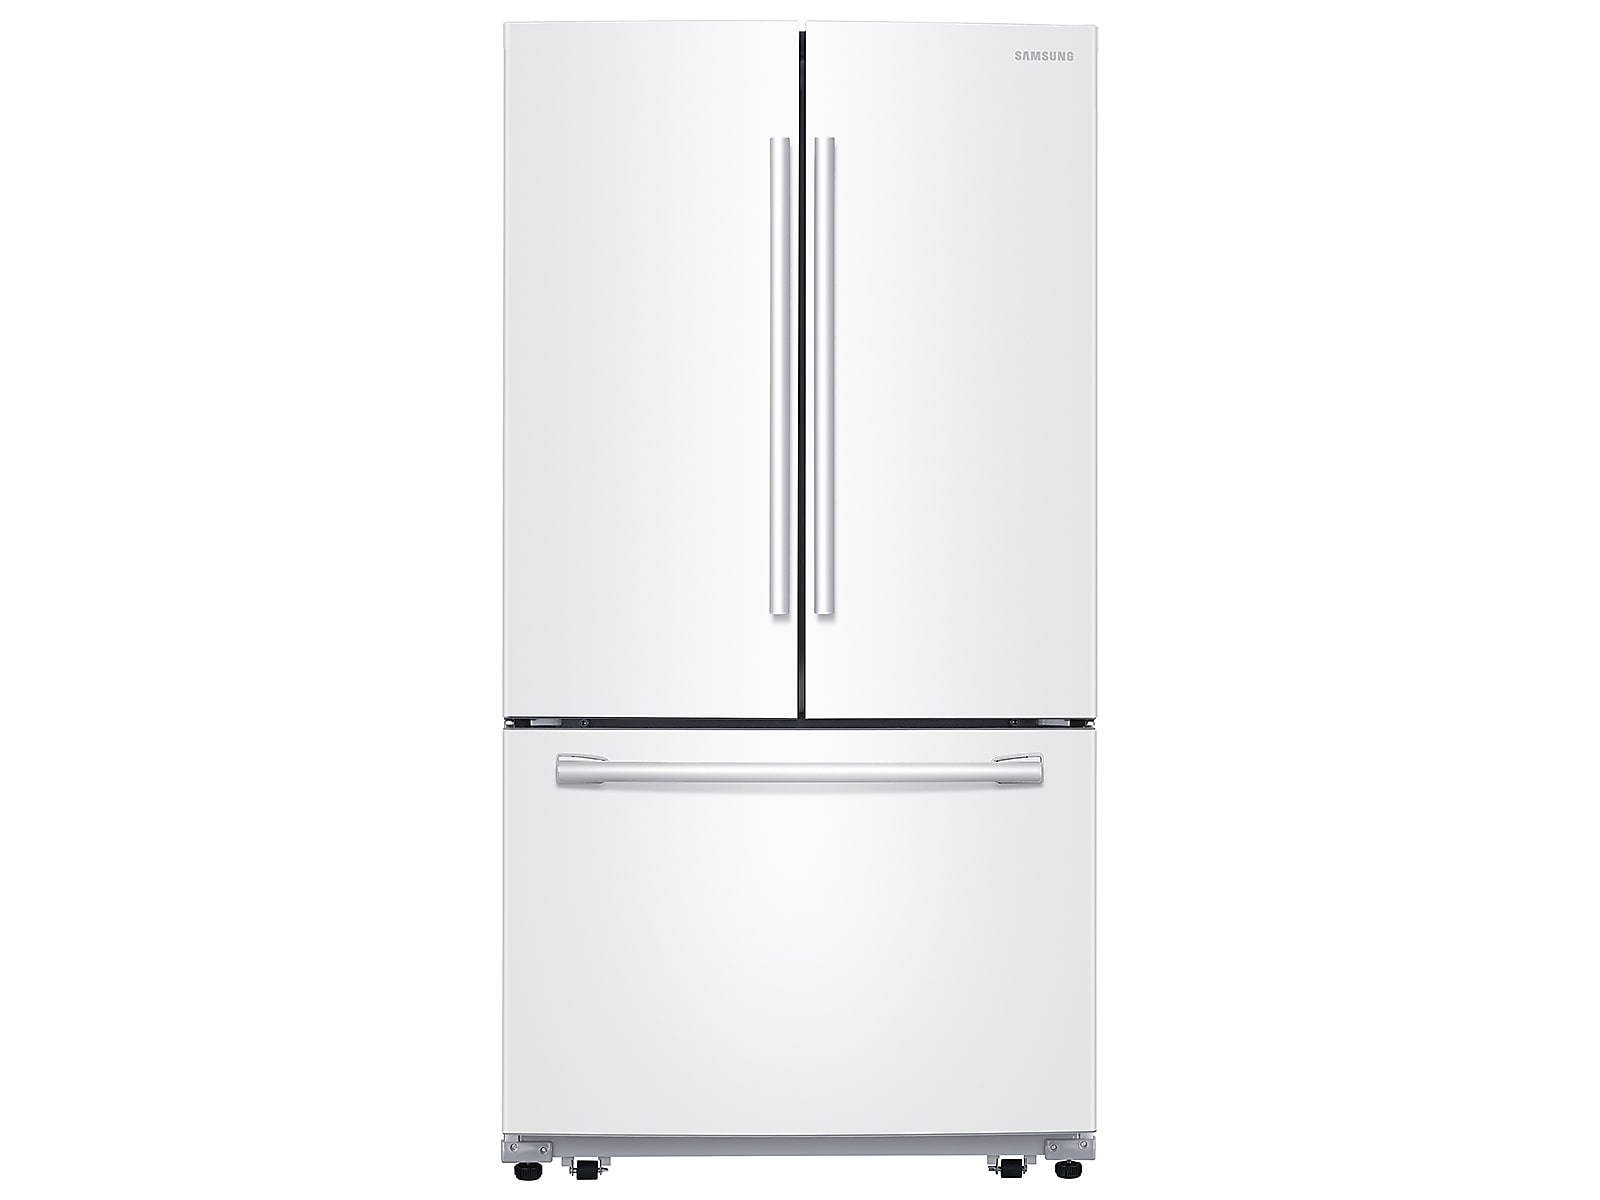 Samsung 26 cu. ft. French Door Refrigerator with Filtered Ice Maker in White(RF260BEAEWW/AA) photo